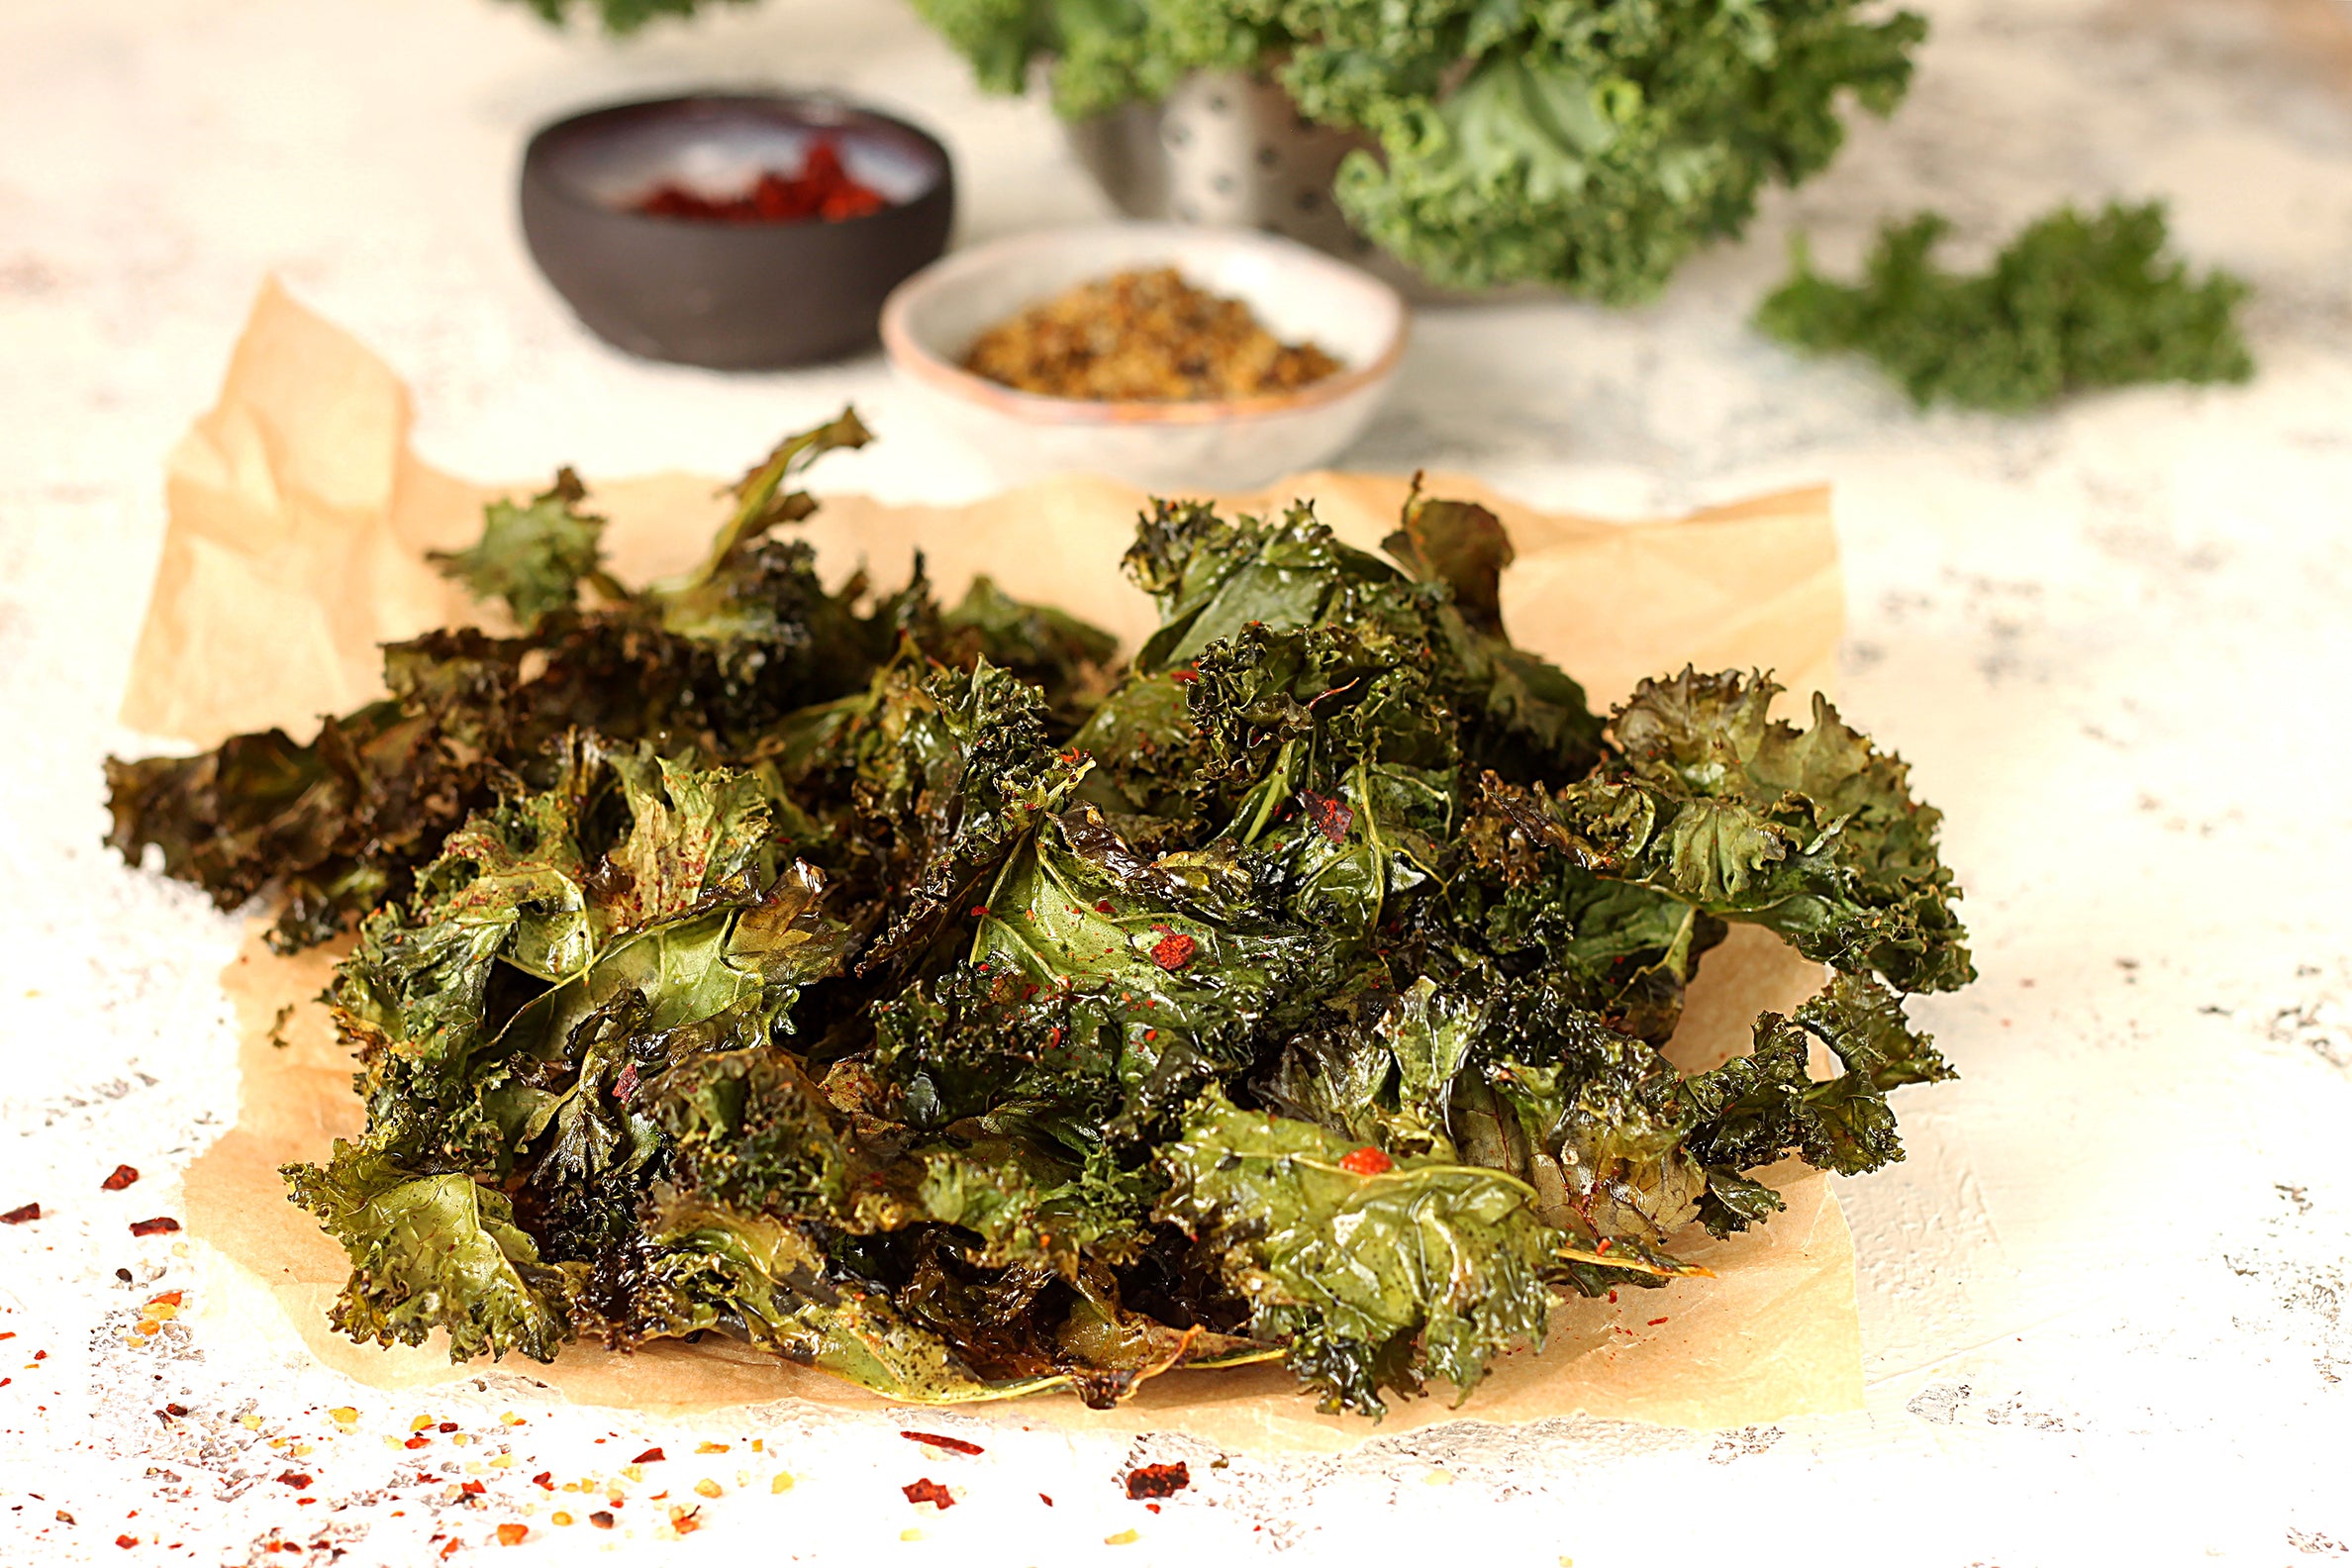 Kale chips are a healthy and crispy snack made by roasting kale leaves with olive oil and seasonings.